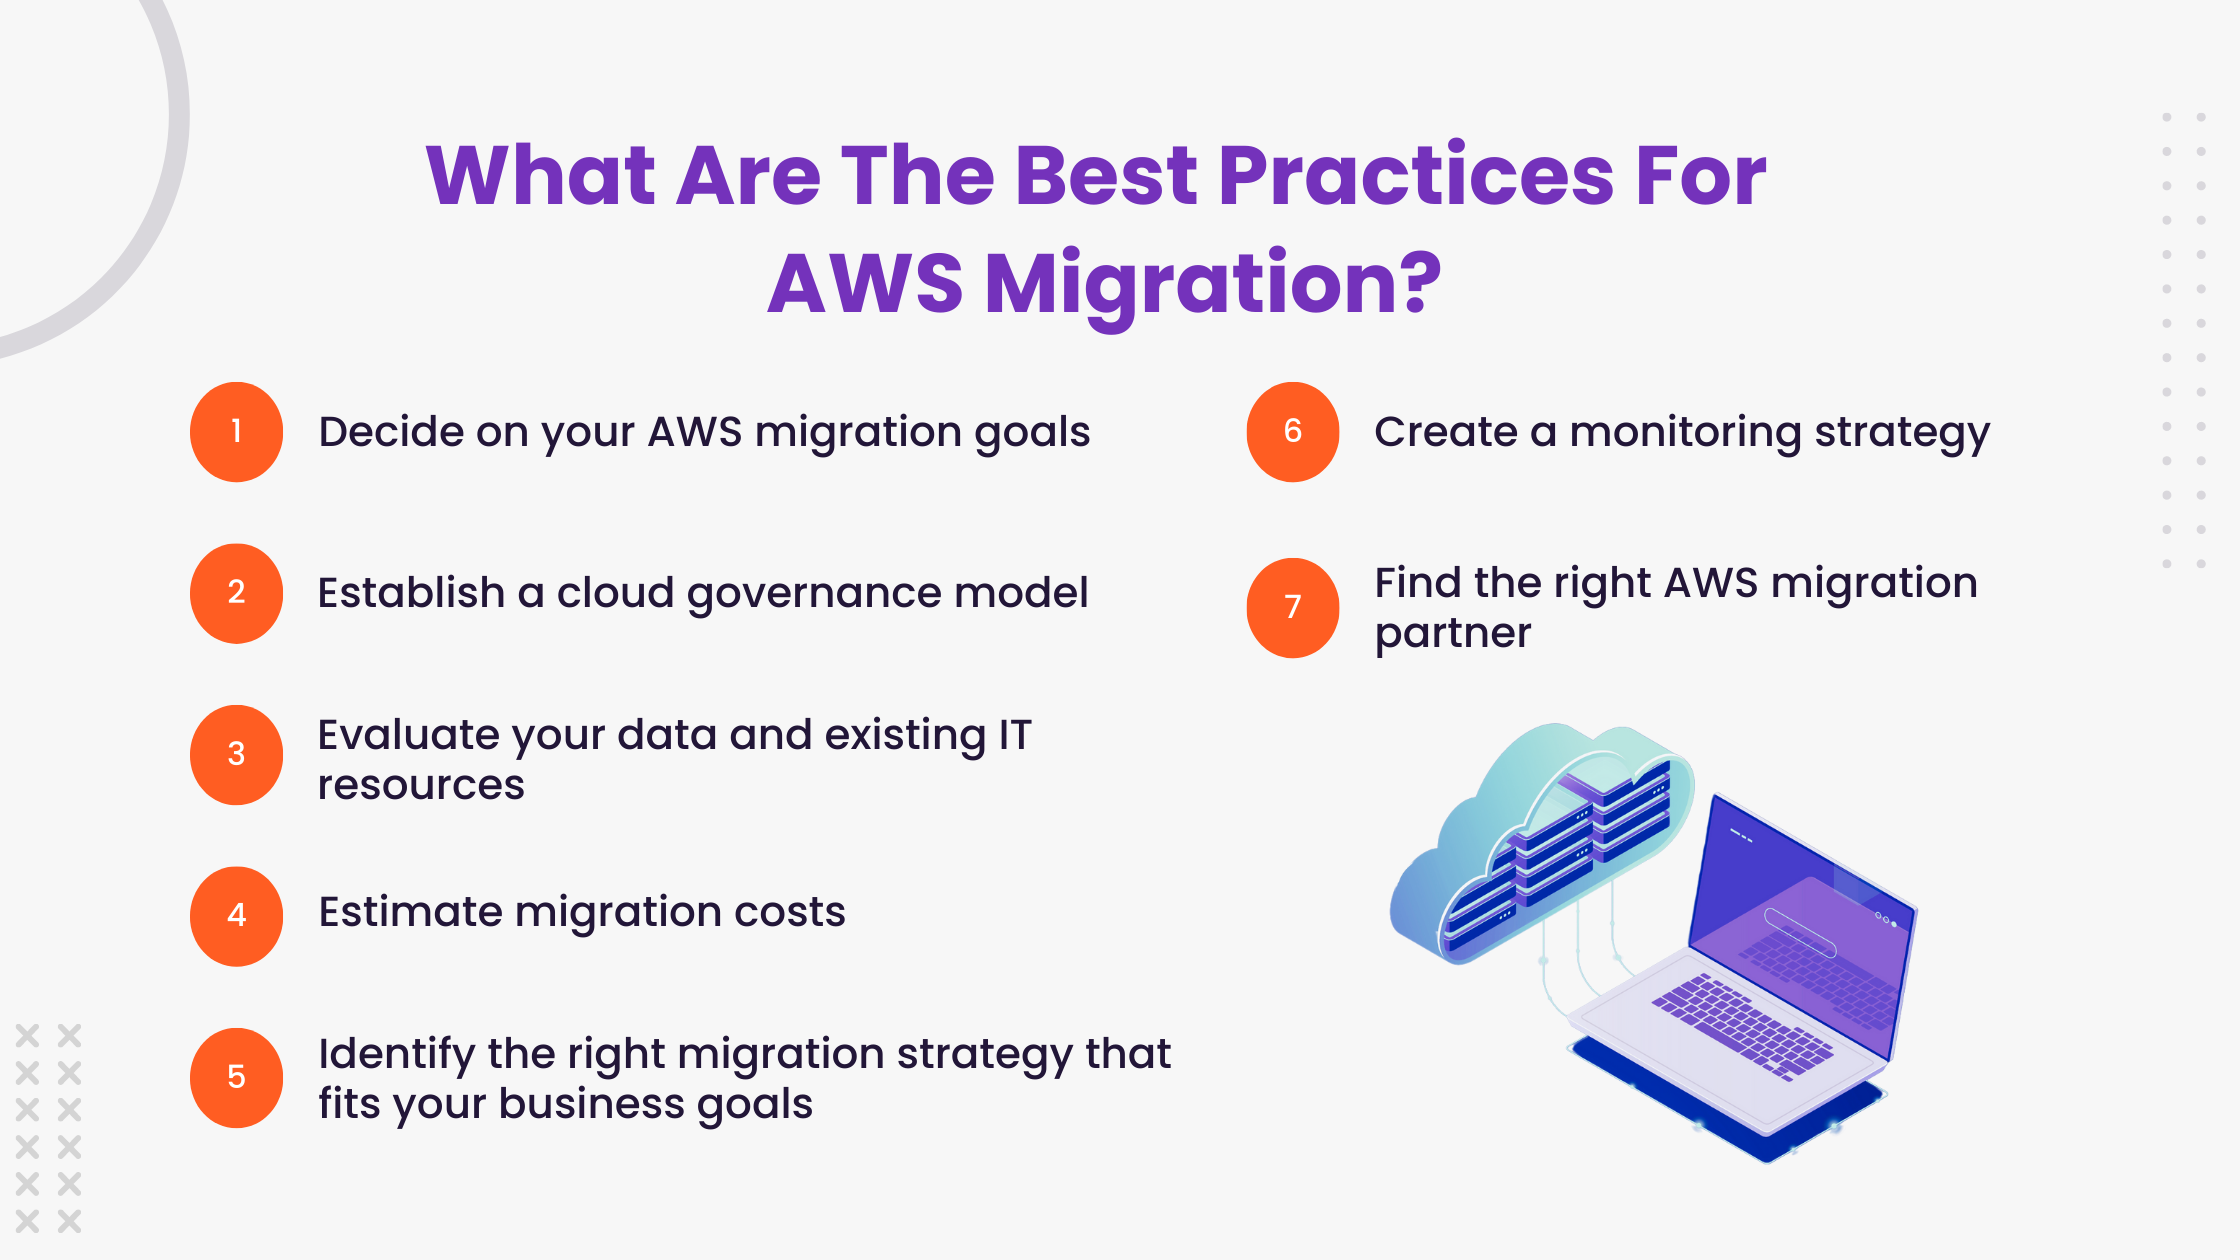 What Are The Best Practices For AWS Migration